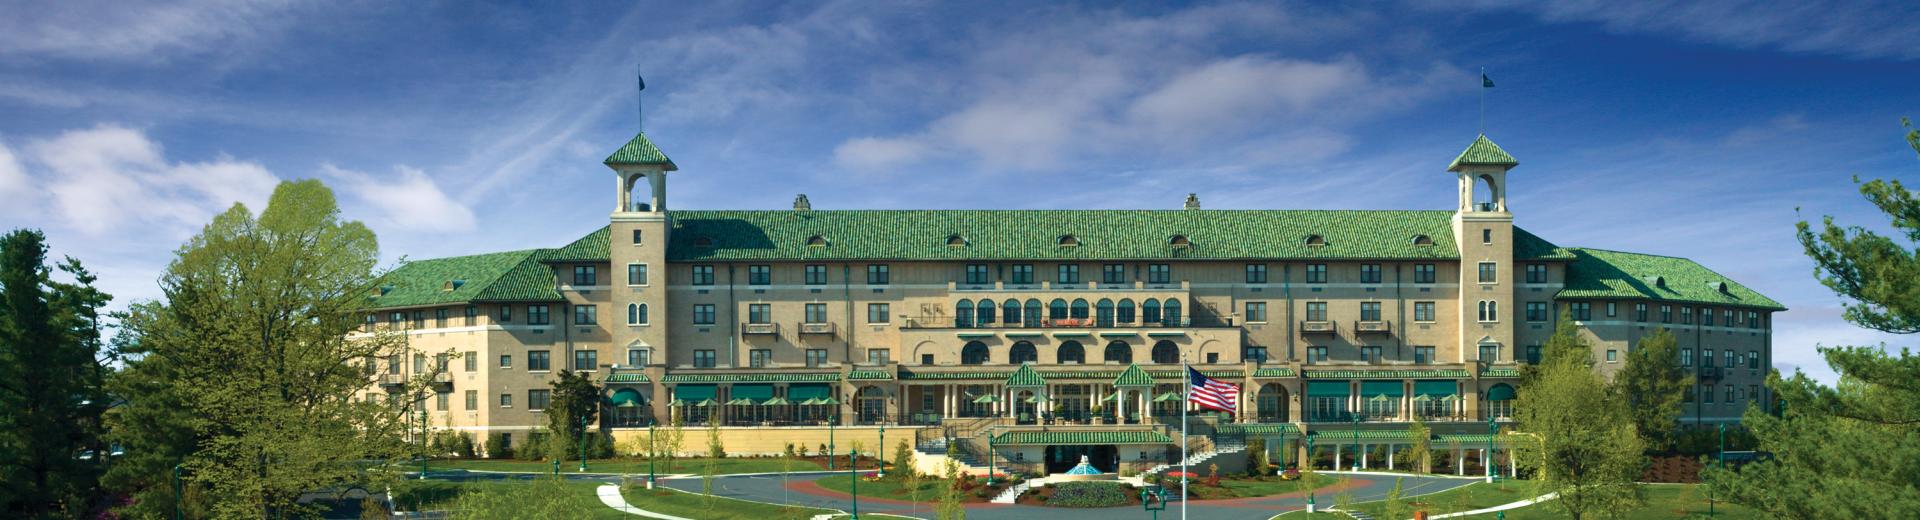 Conference and Convention Hotels in Hershey Harrisburg